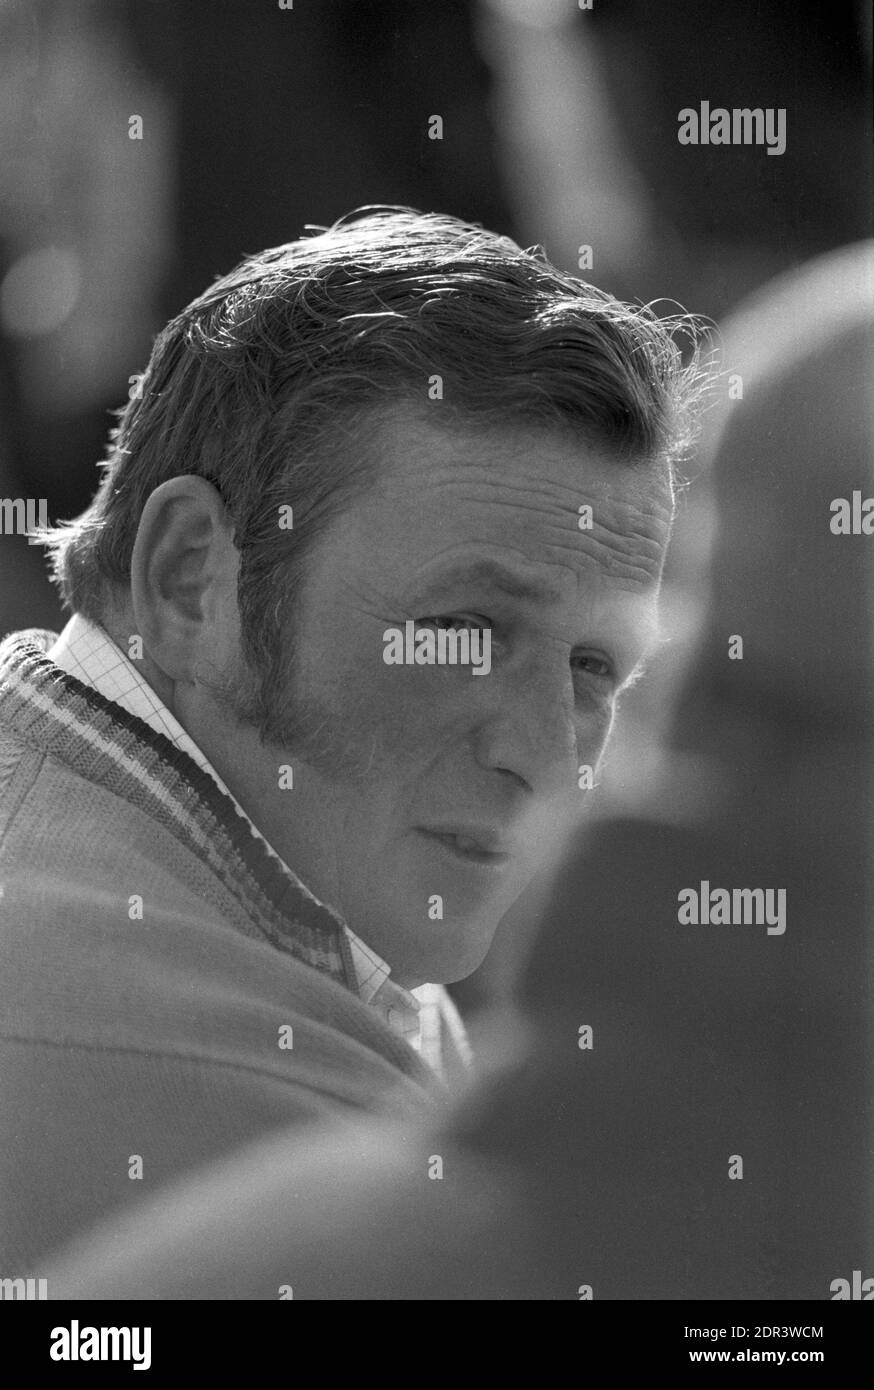 UK, England, Devonshire, Buckfastleigh, 1972. Point-to-Point races were held at  Dean Court on the Dean Marshes, close to the A38 between Plymouth and Exeter. A male spectator with fashionable sideburns. Stock Photo